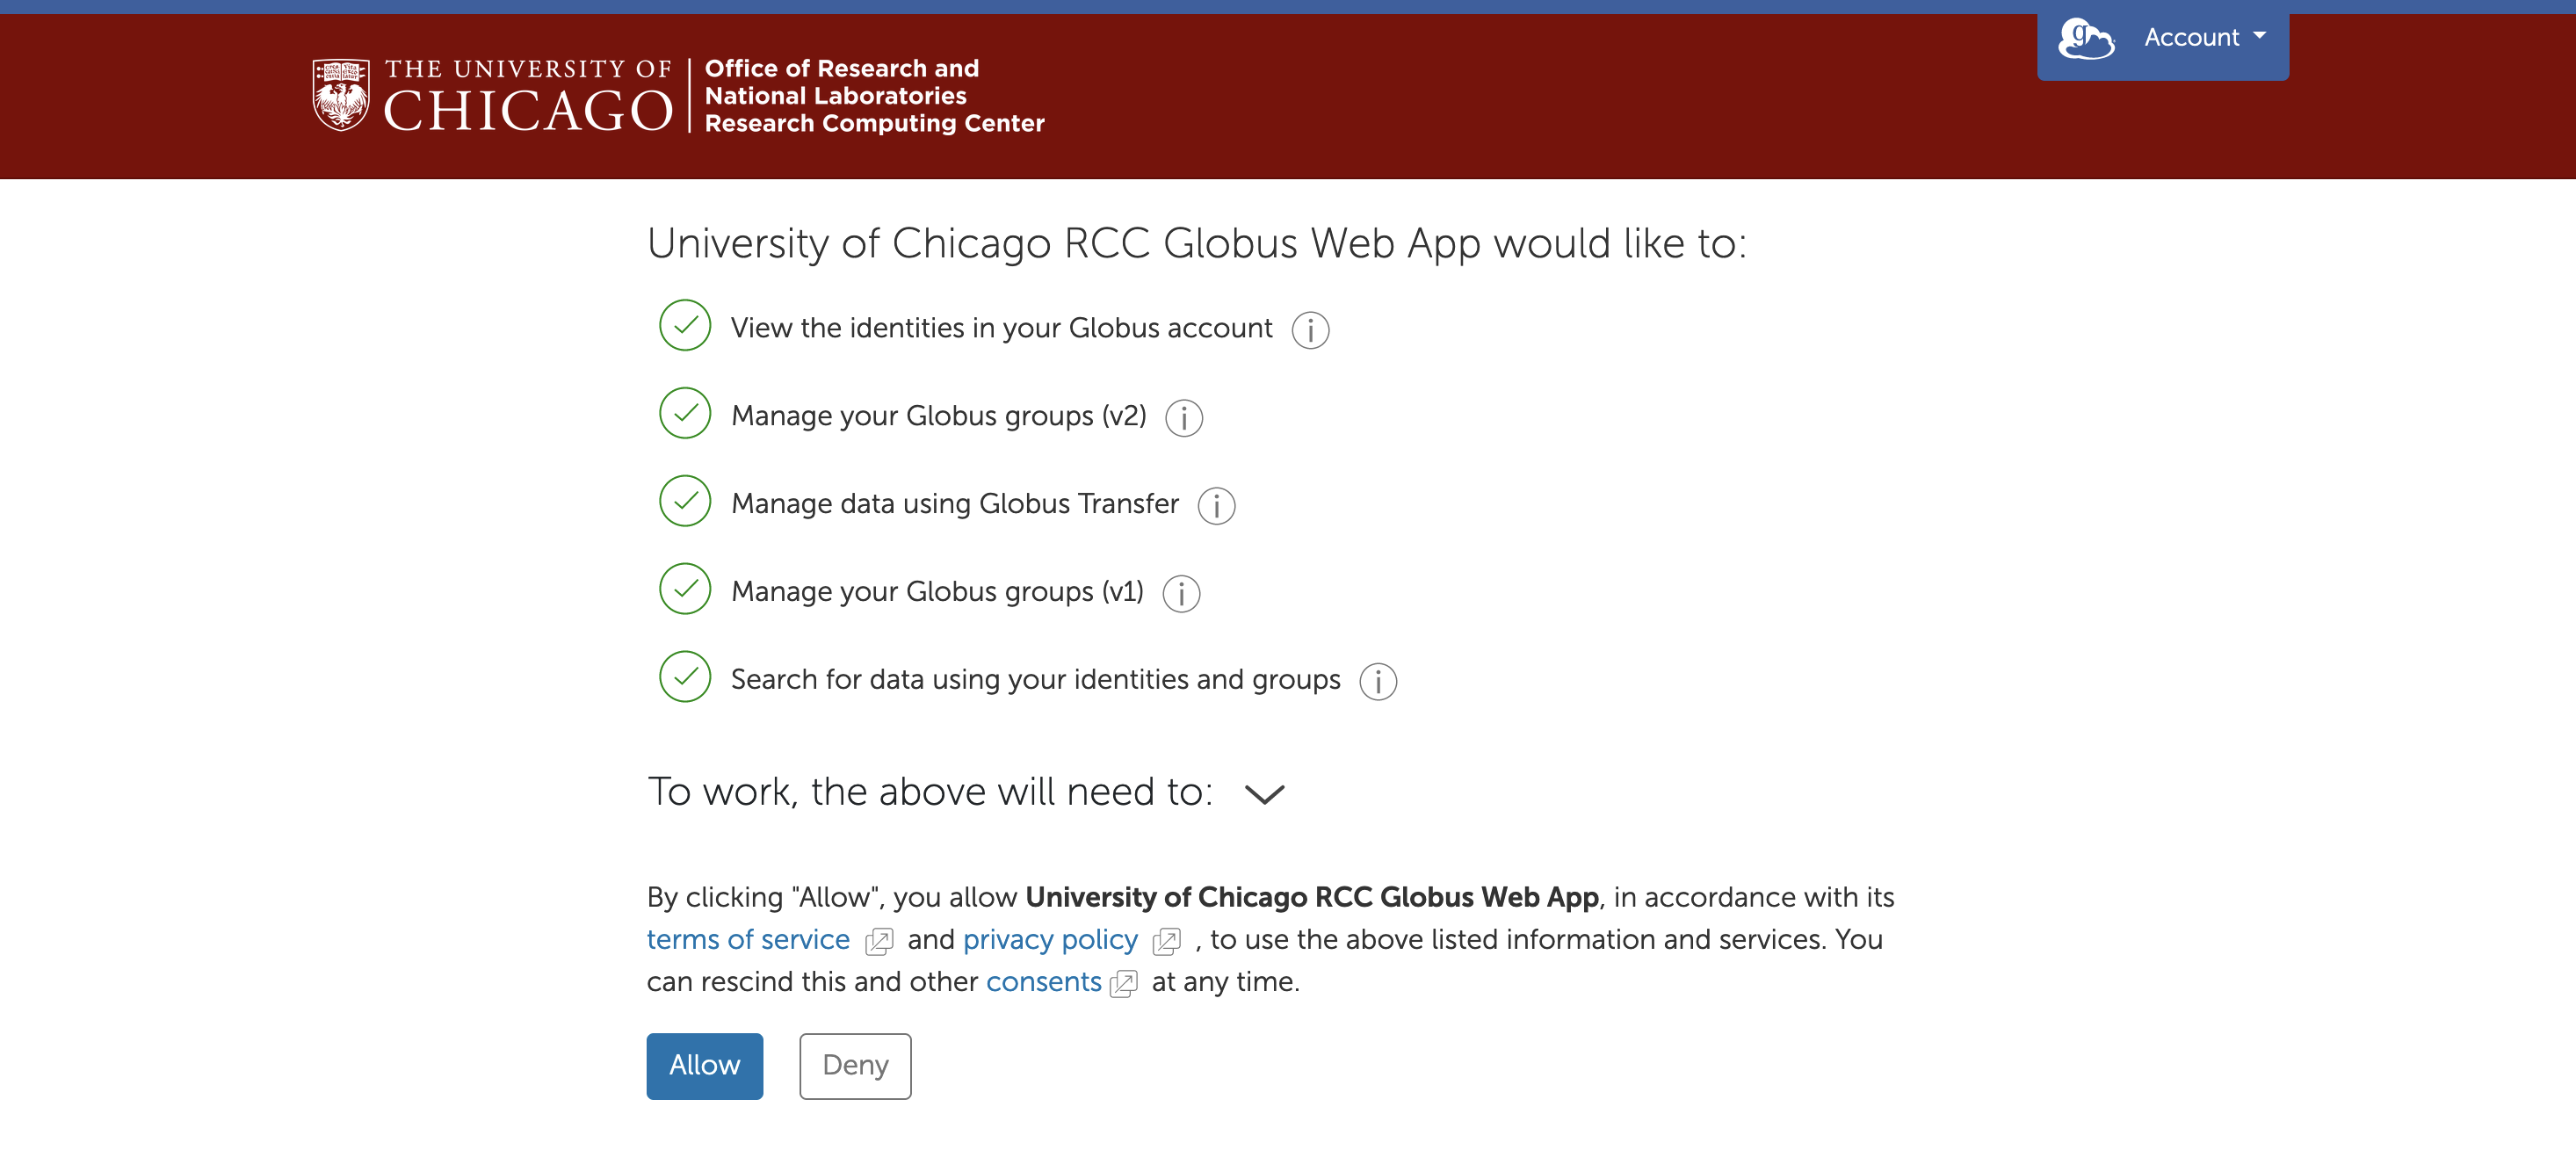 A list of permissions requested by the RCC Globus web app with options to allow or deny.